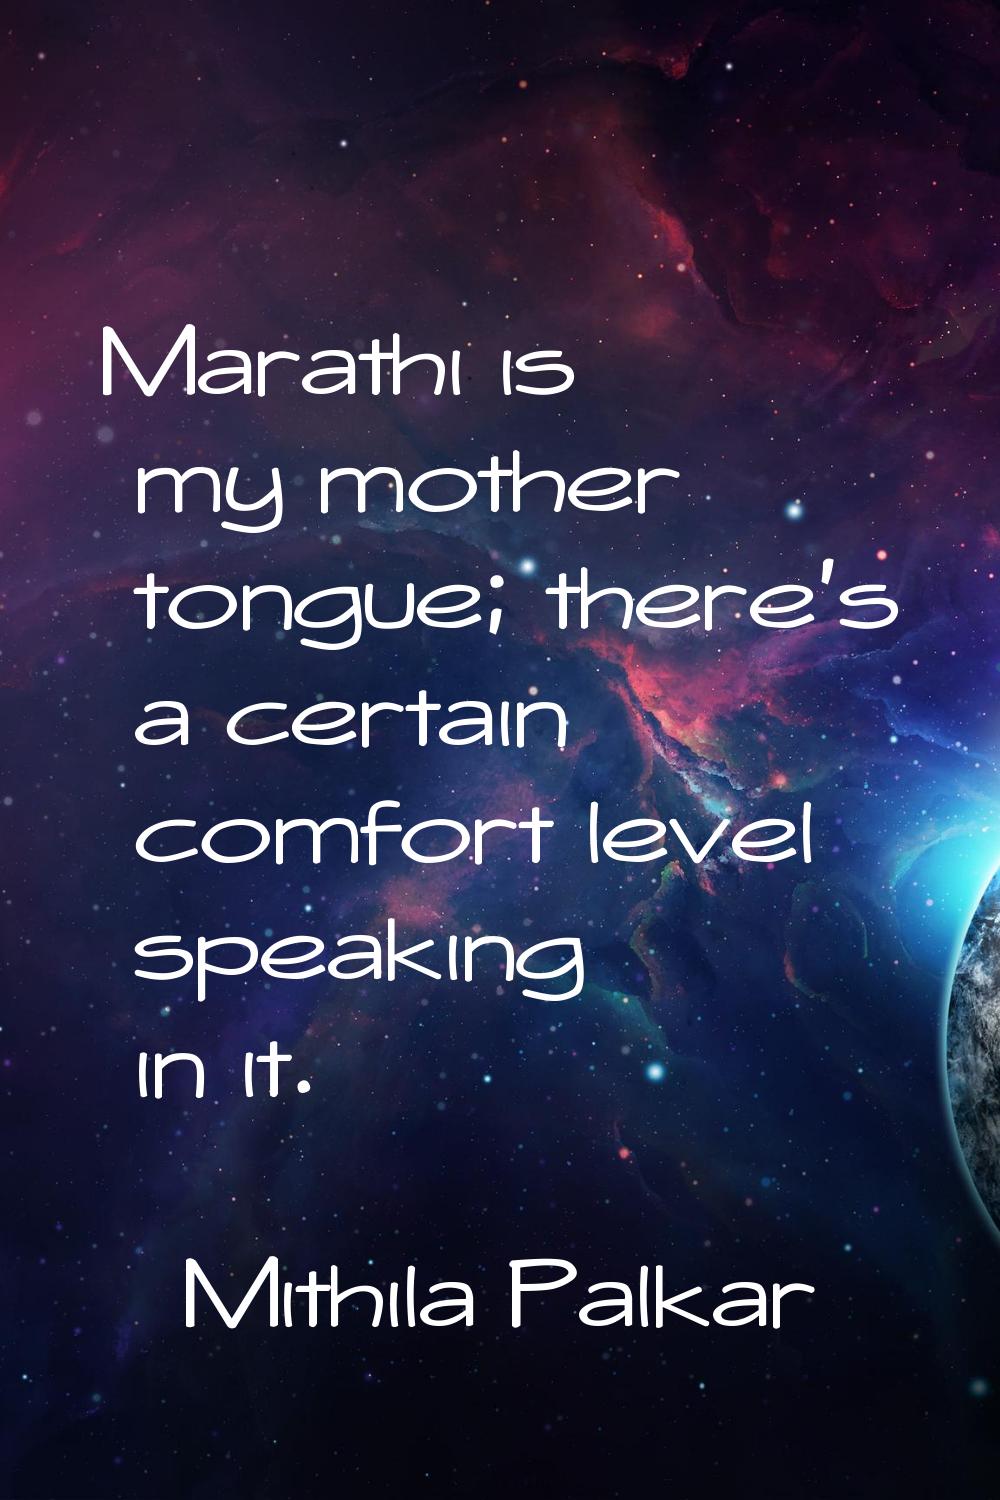 Marathi is my mother tongue; there's a certain comfort level speaking in it.